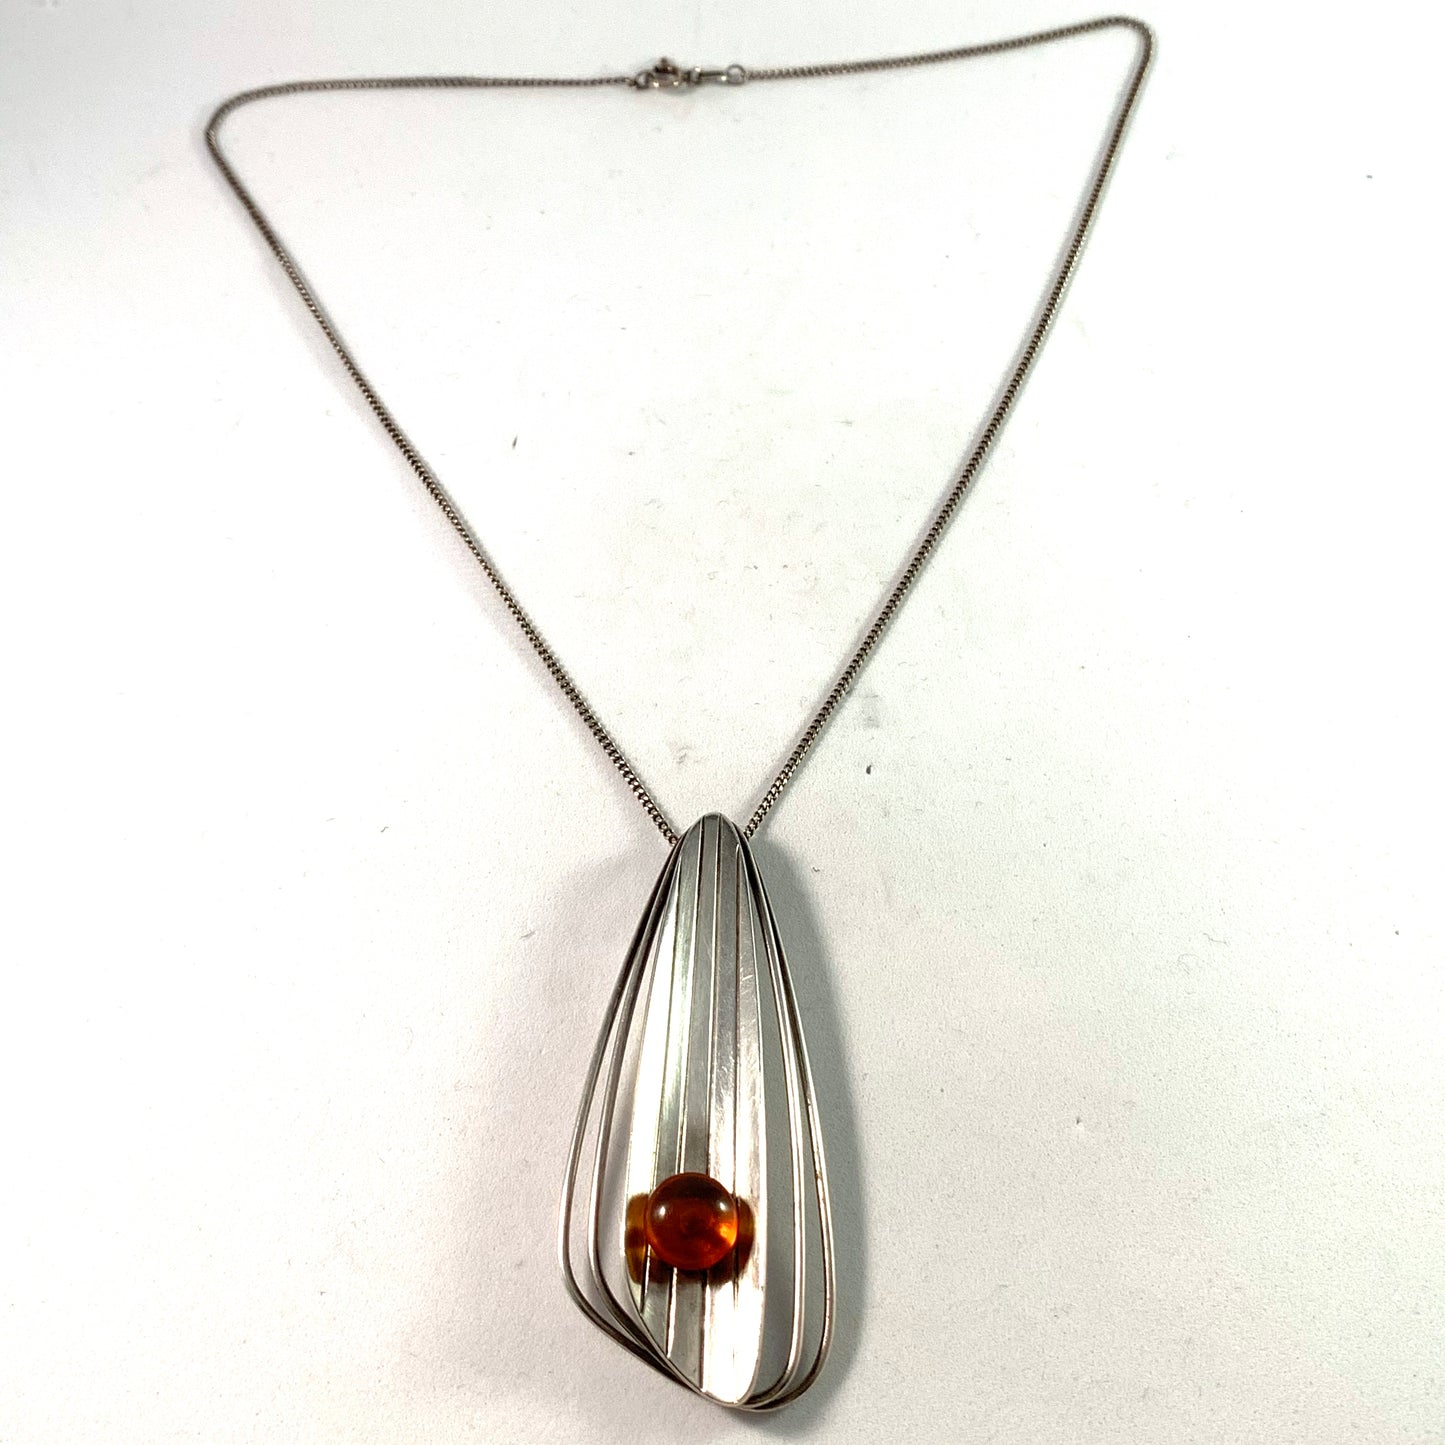 Fischland Ostseeschmuck, Germany 1960s Large 835 Silver Amber Pendant Necklace.